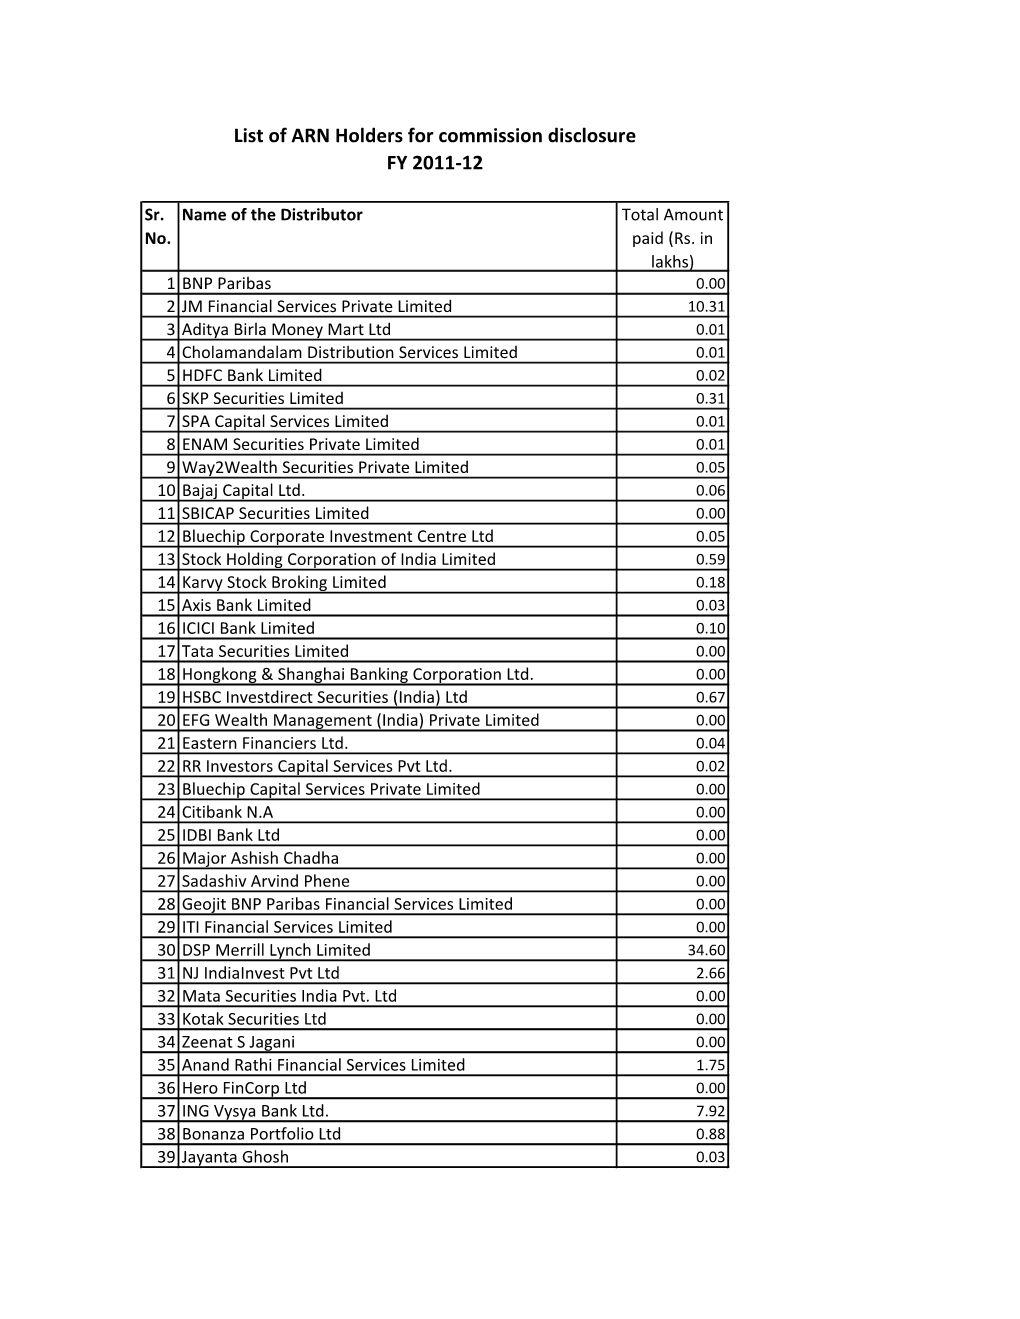 List of ARN Holders for Commission Disclosure FY 2011-12